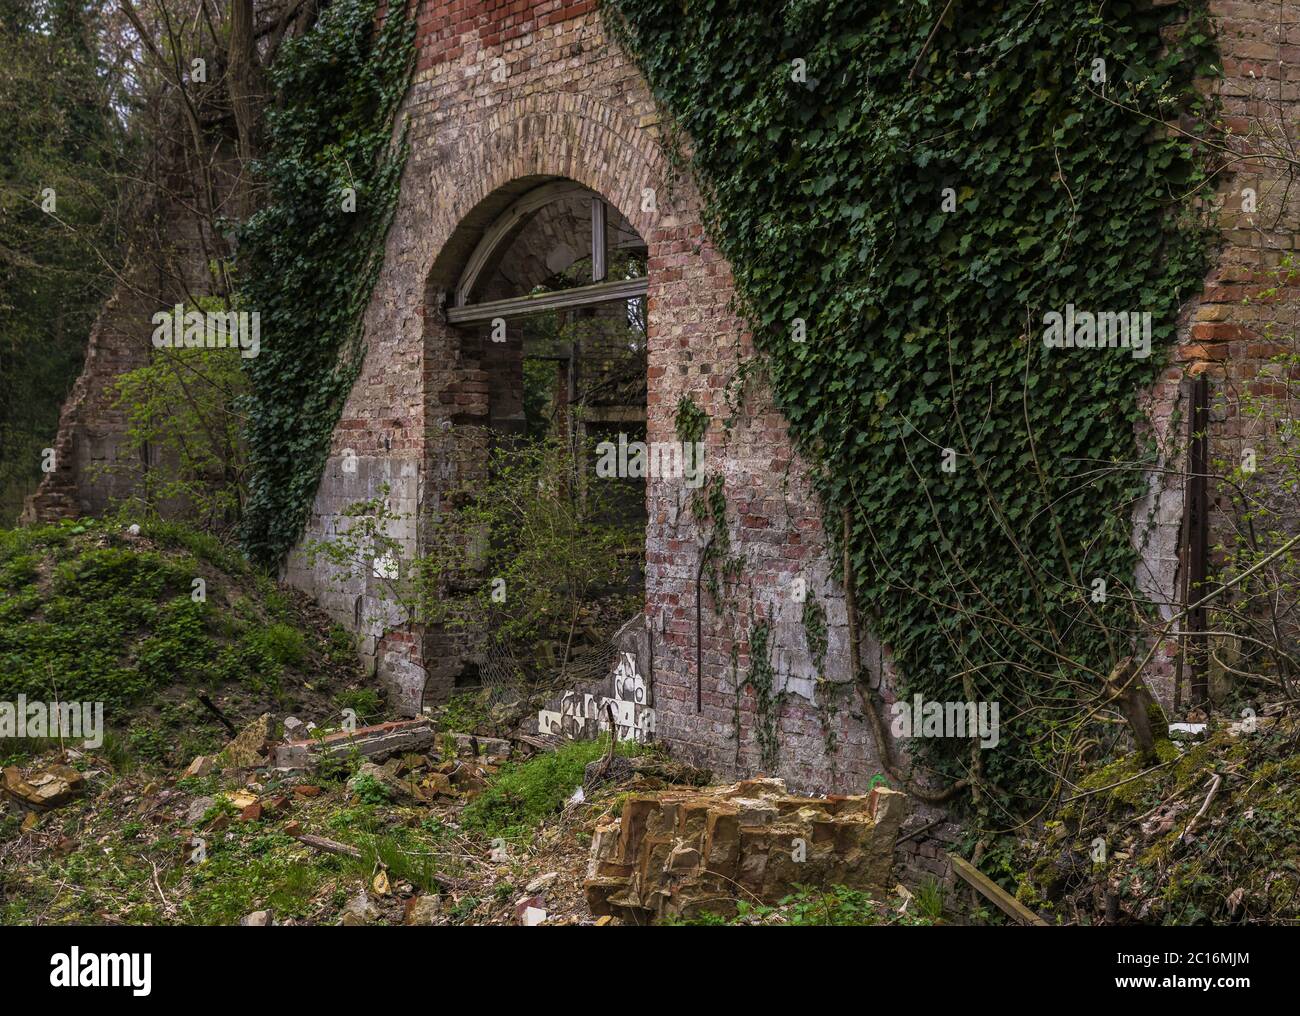 Ruin in the forest Stock Photo